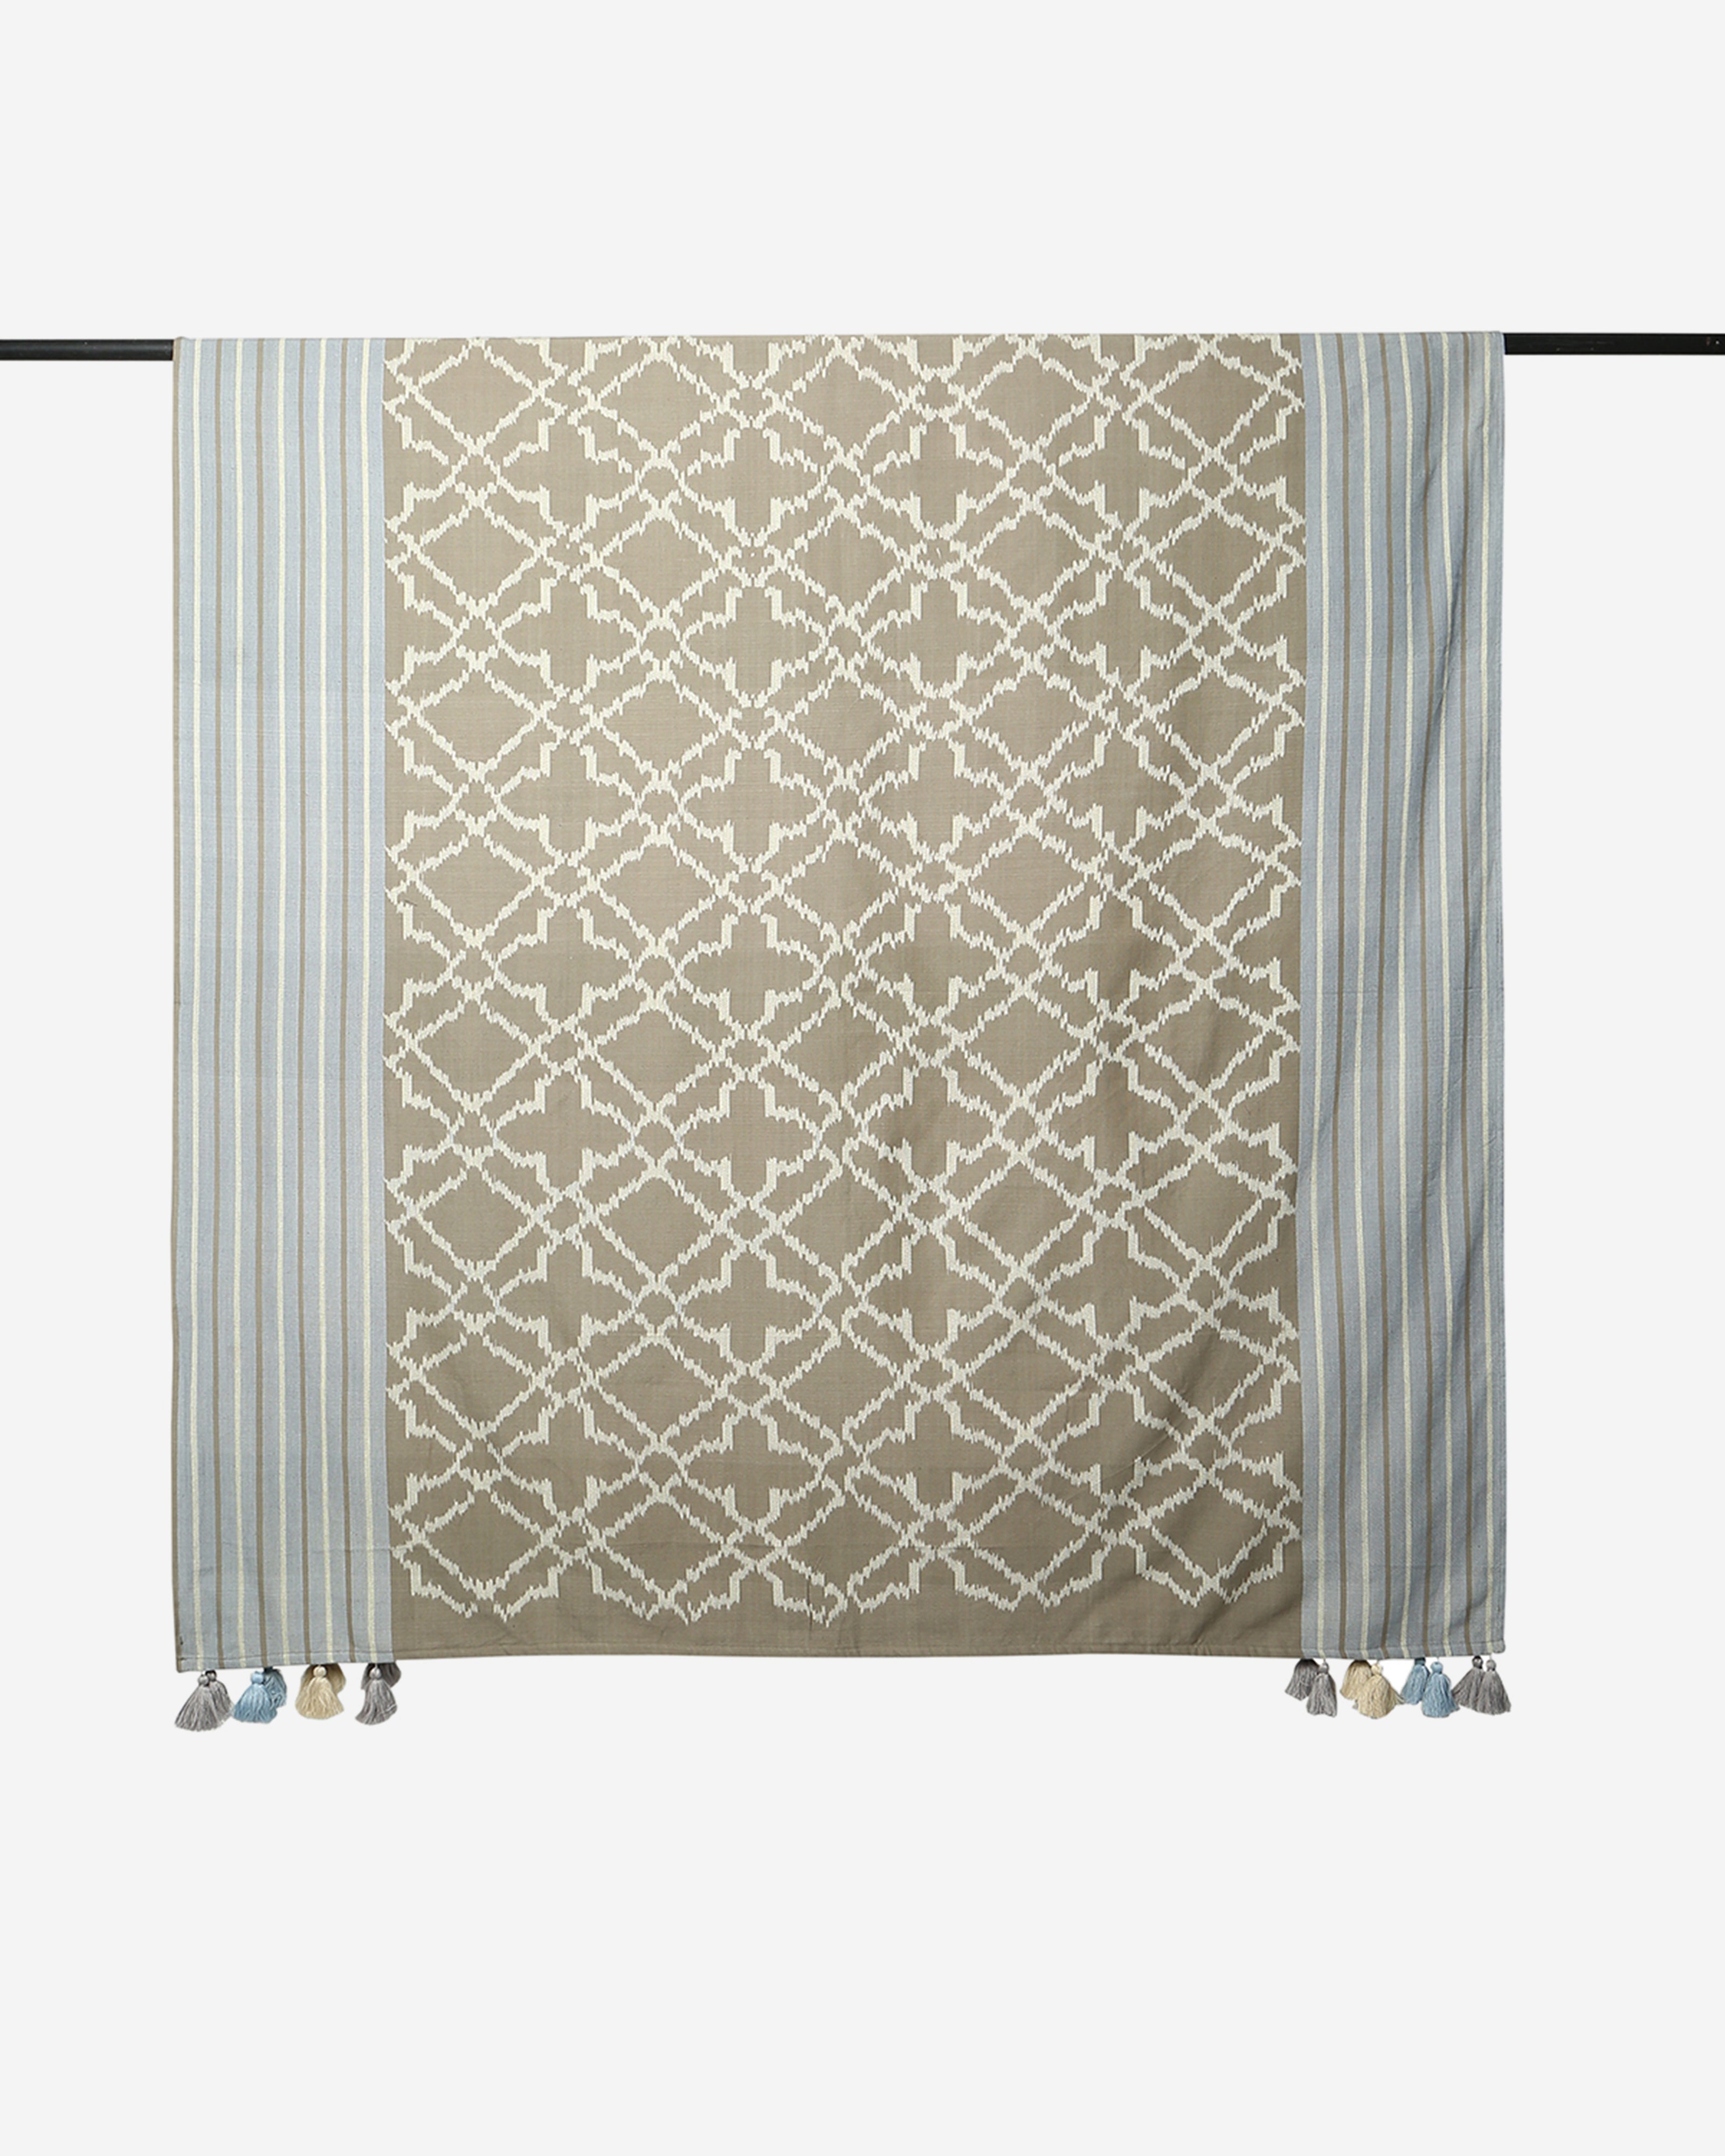 Florencia Weft Ikat Cotton Table Cover